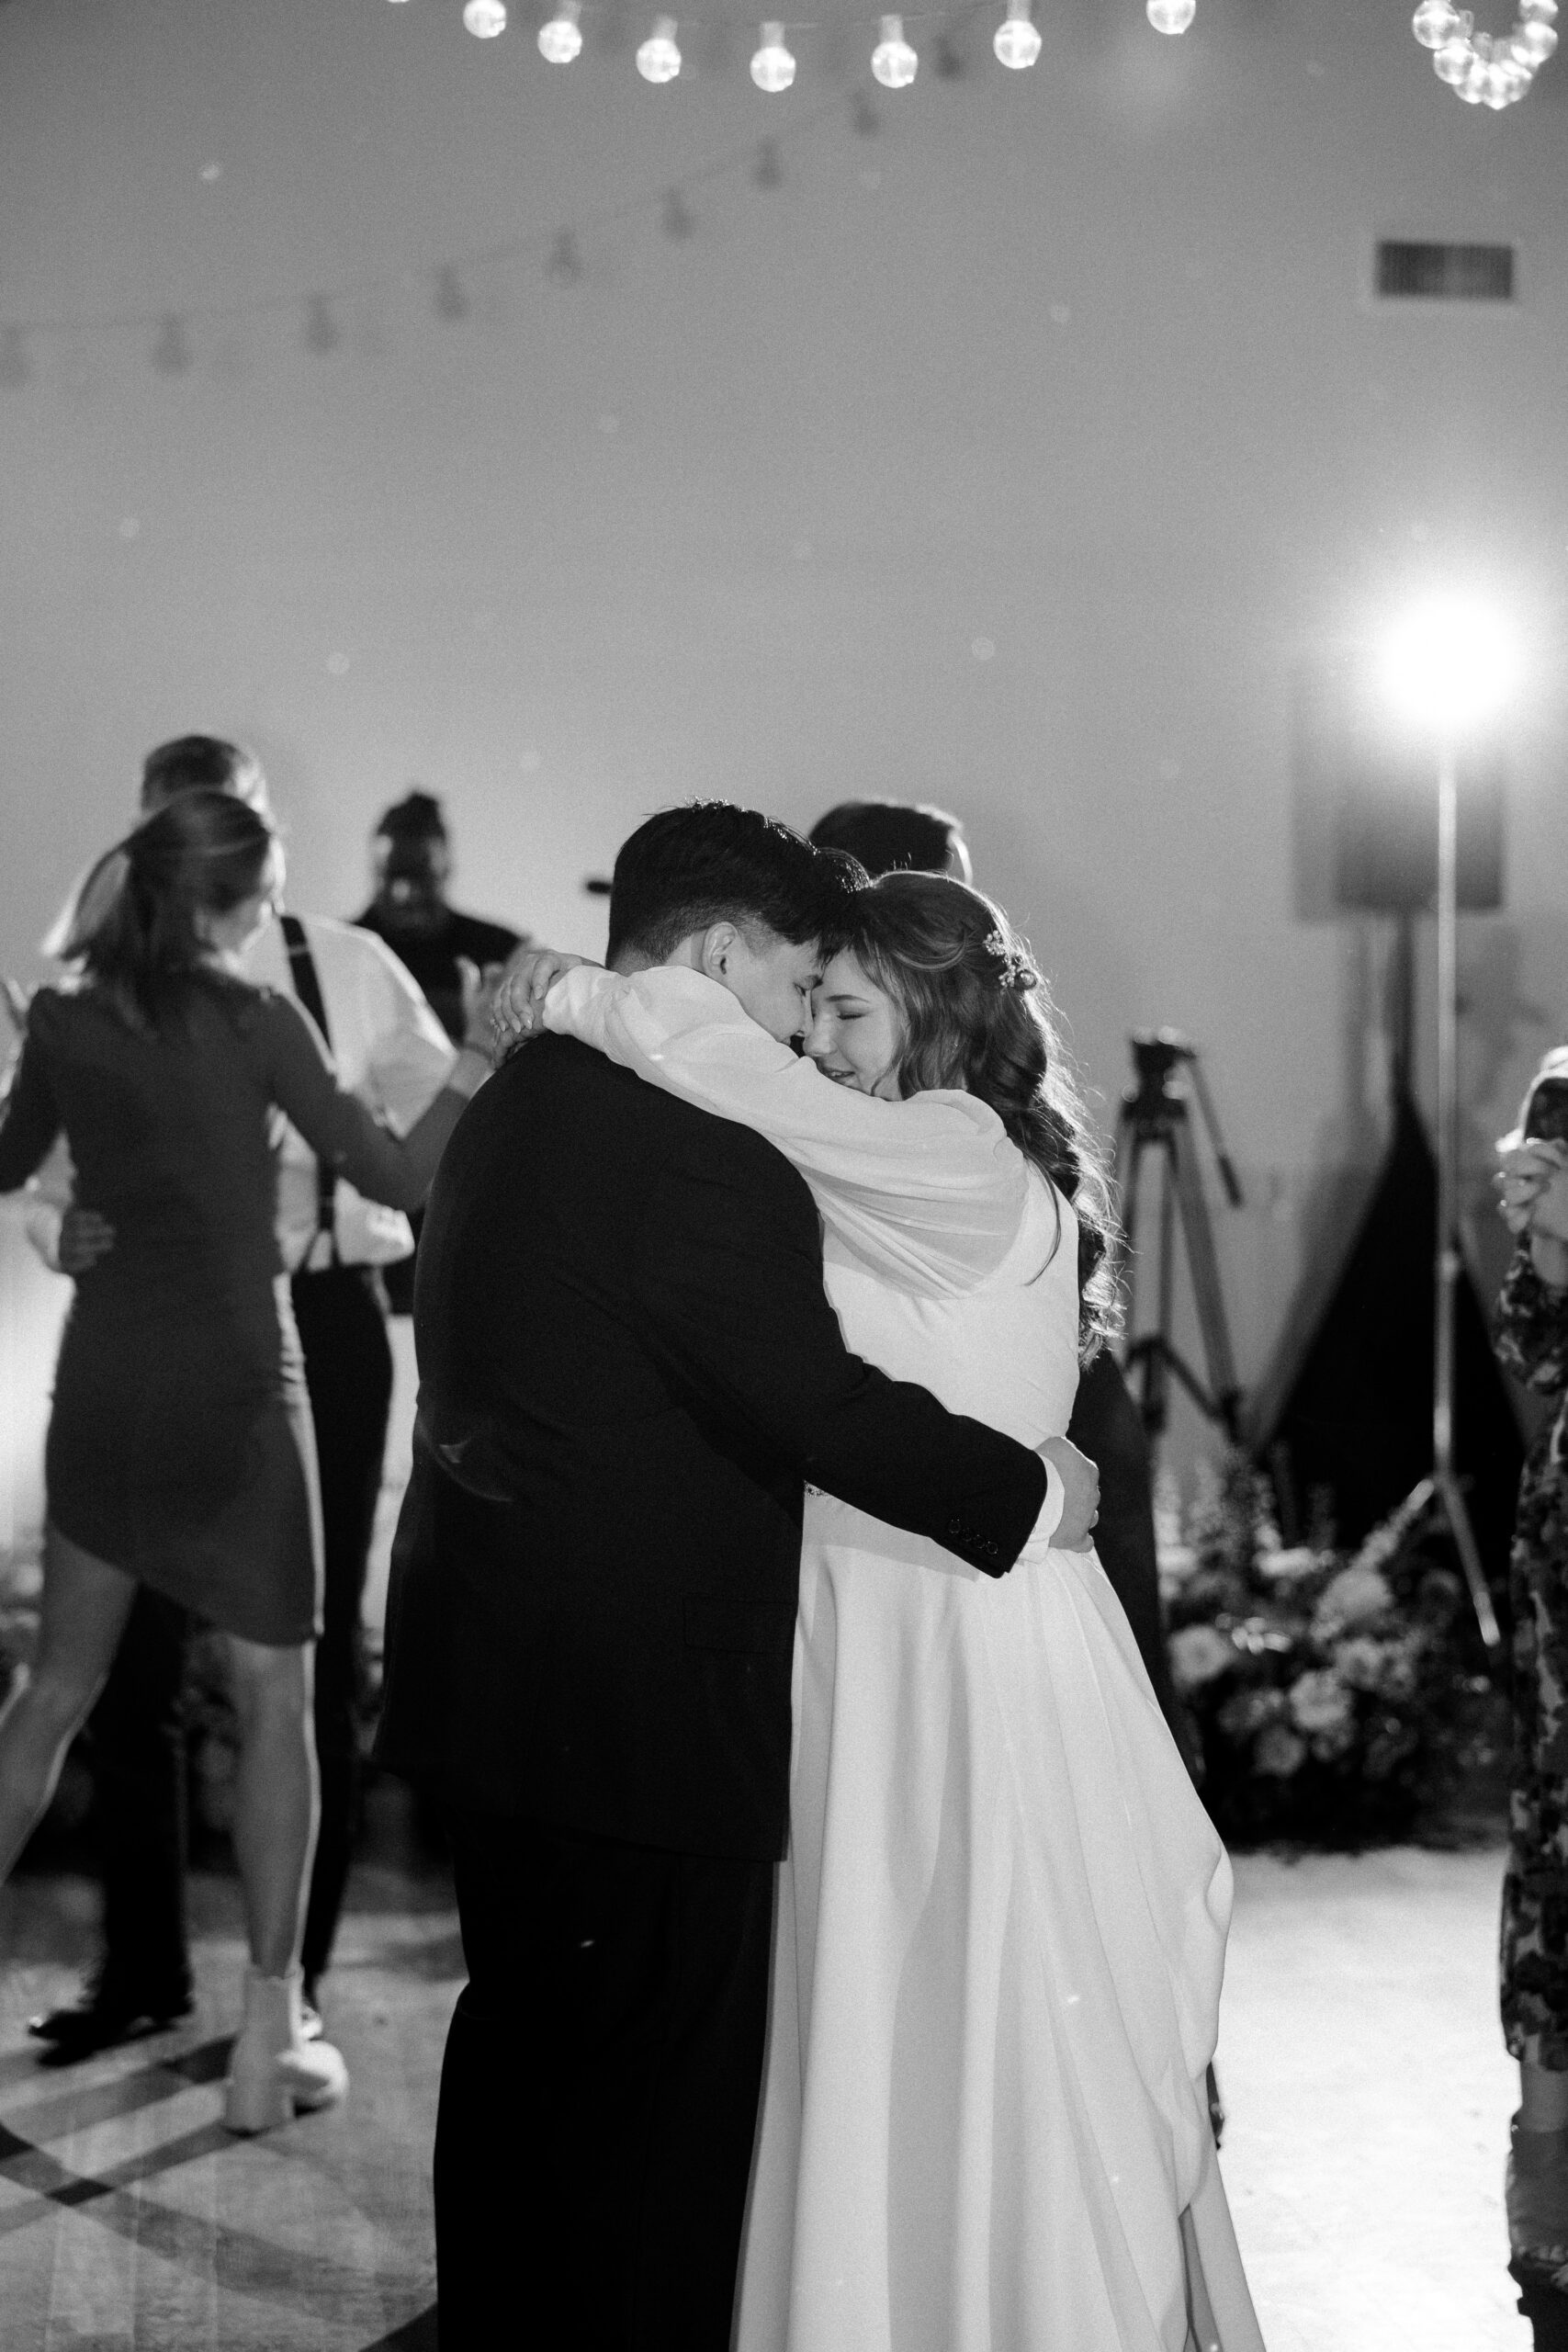 Black and white photo of bride and groom on dance floor while other guests dance in background